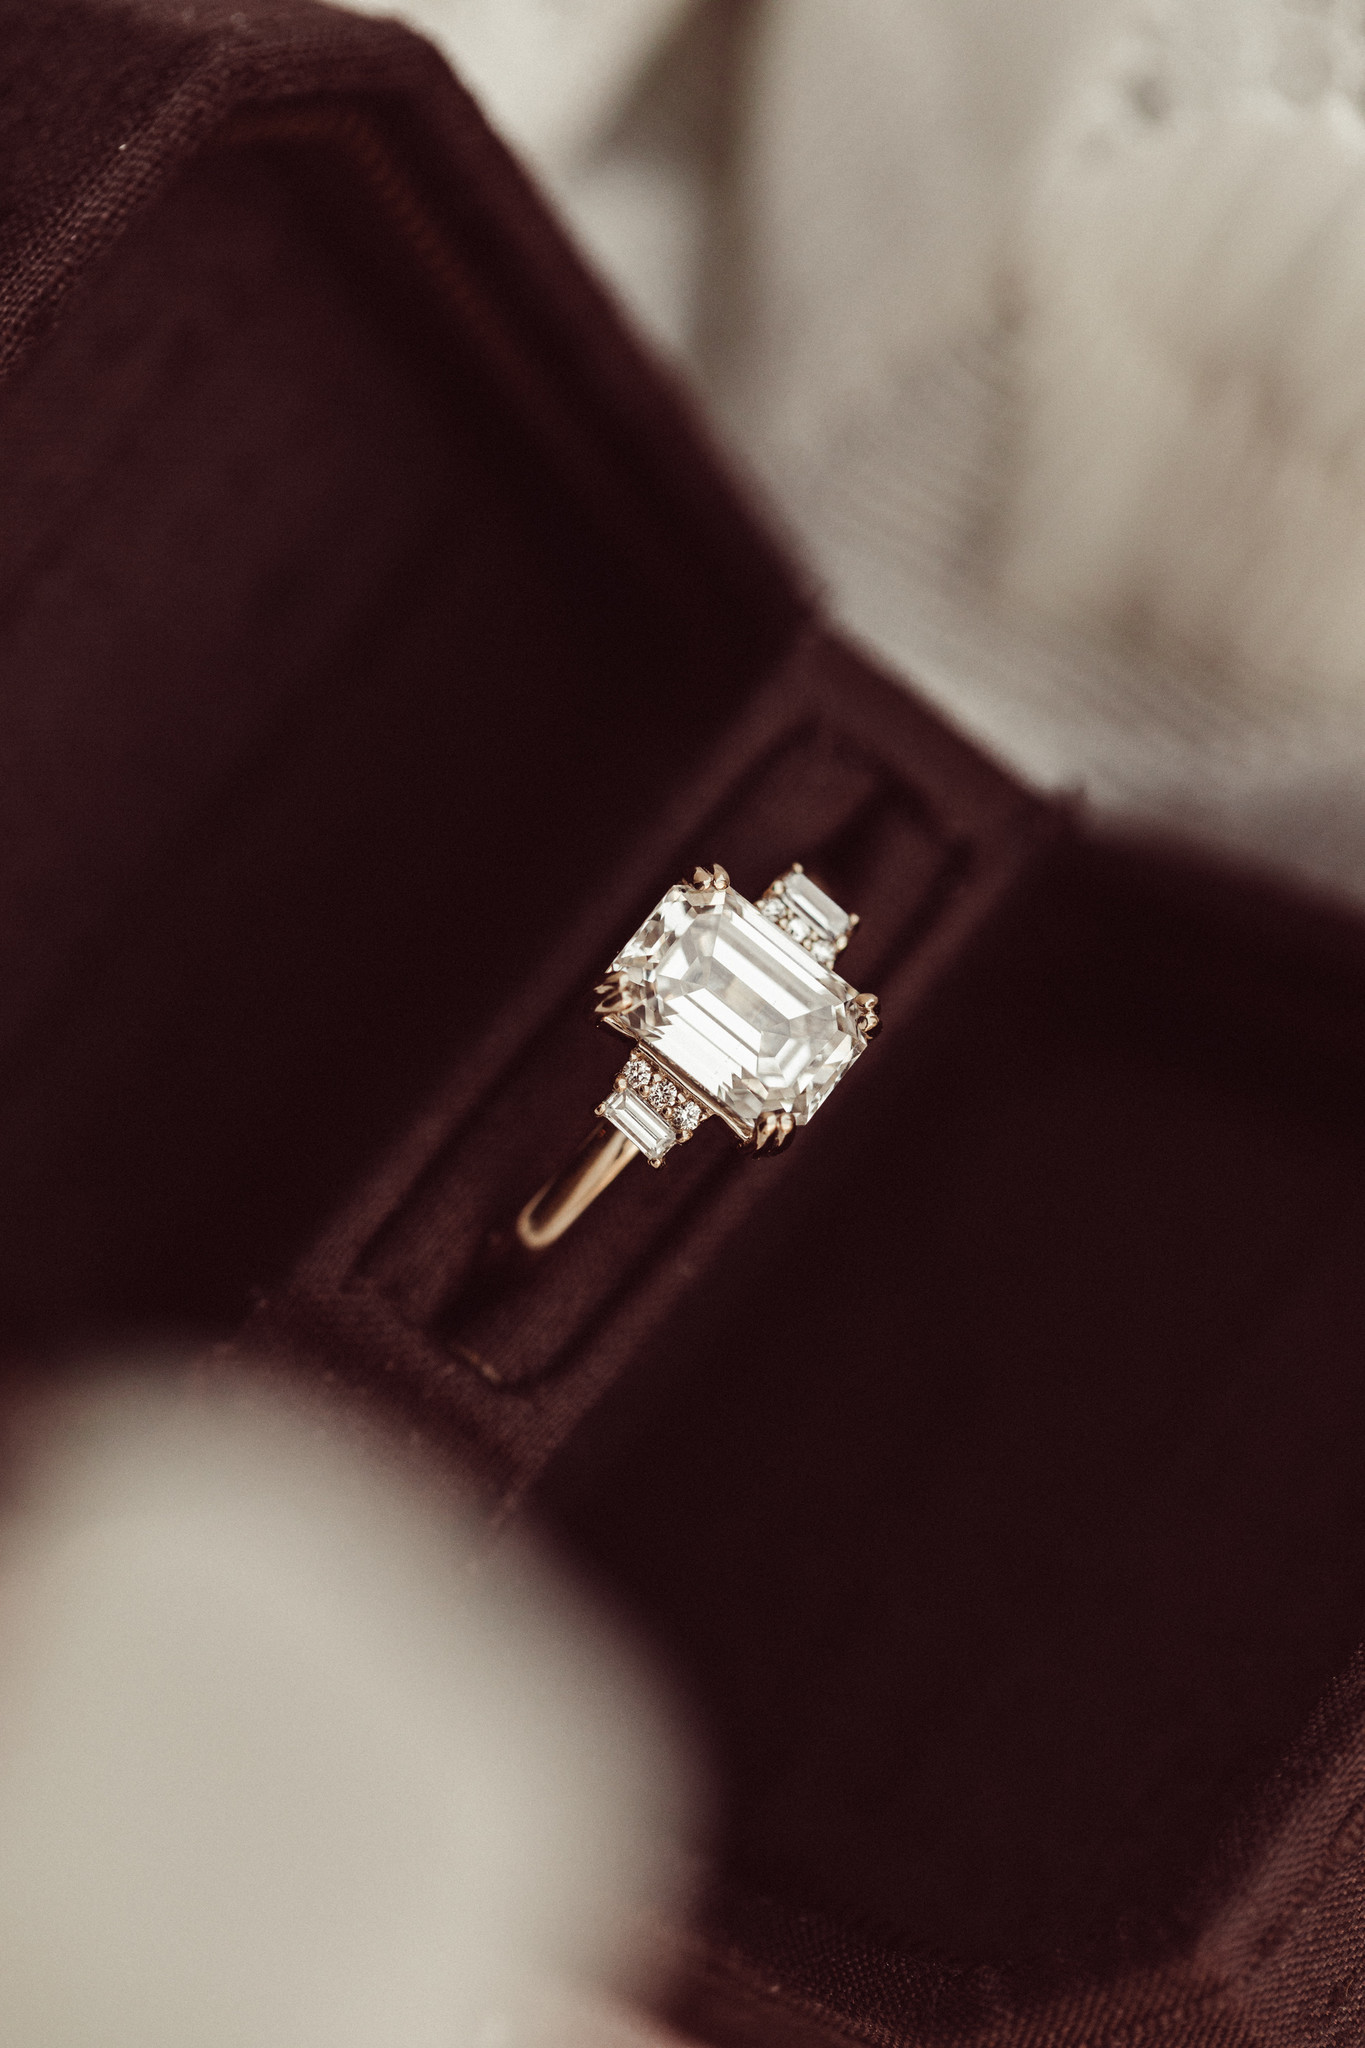 Celebrities Who Have Emerald-Cut Engagement Rings | by Charles Brownsadc |  Medium